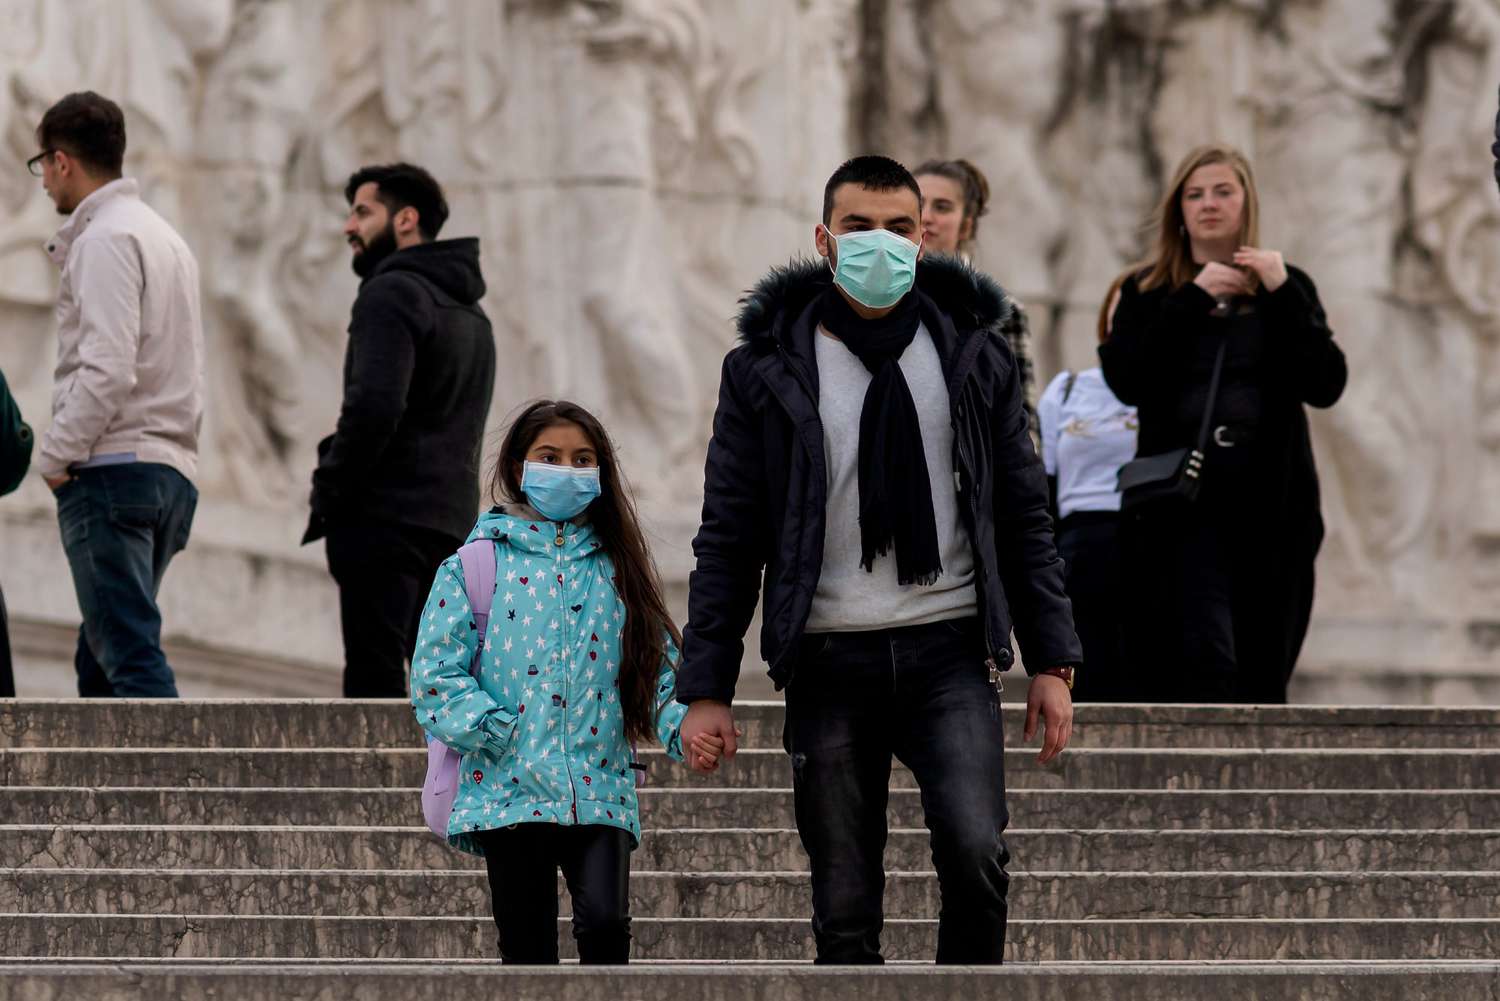 People wear face protective masks in the Altar of the fatherland (Altare della Patria) on March 5, 2020 in Rome, Italy. Today family Minister Elena Bonetti said that the government is studying ways to help families after it decided to close Italy's schools and universities until the middle of March because of the coronavirus emergency (Covid-19).